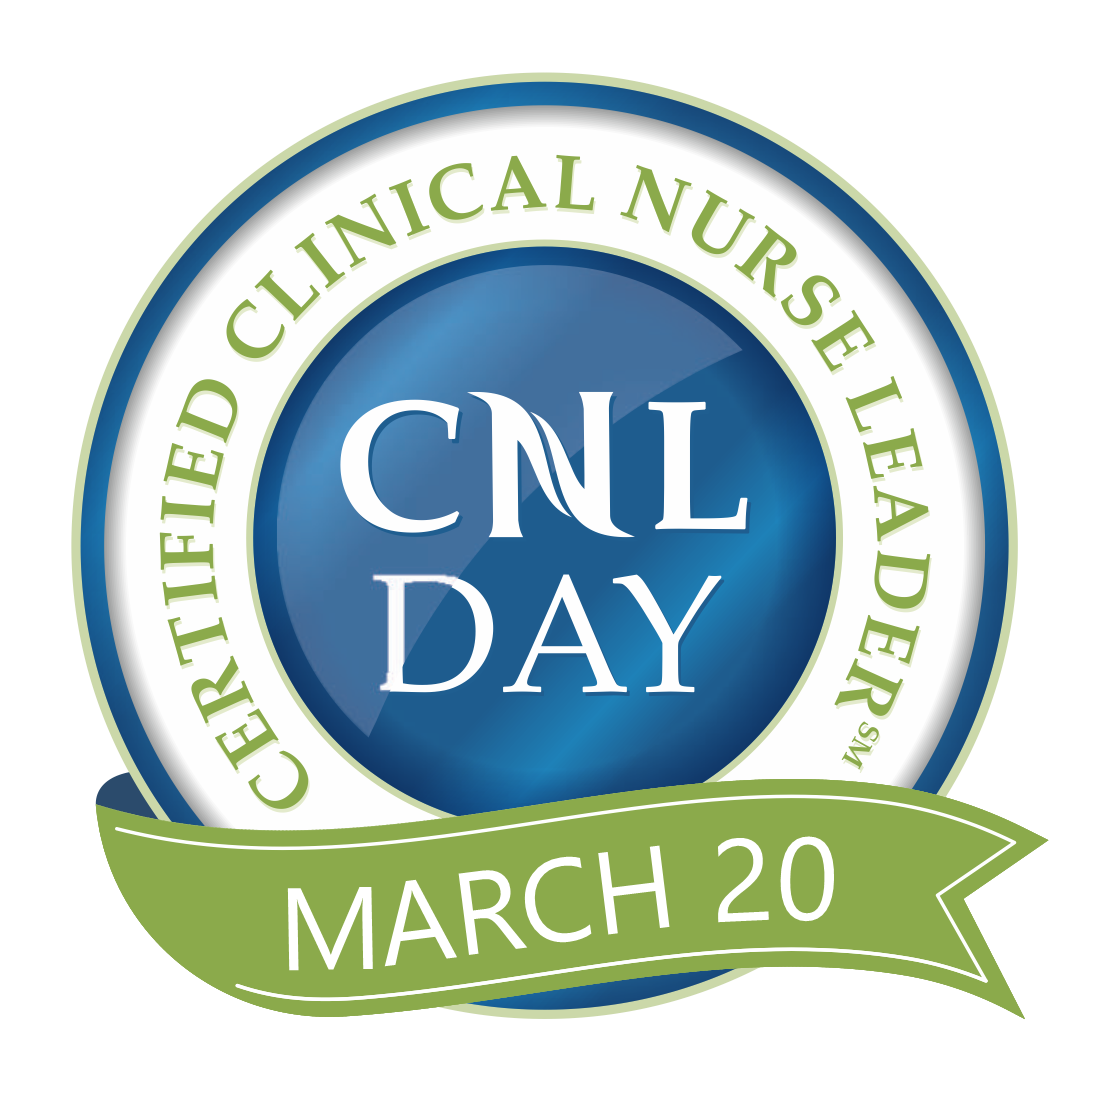 Certified clinical nurse leader | CNL Day | March 20